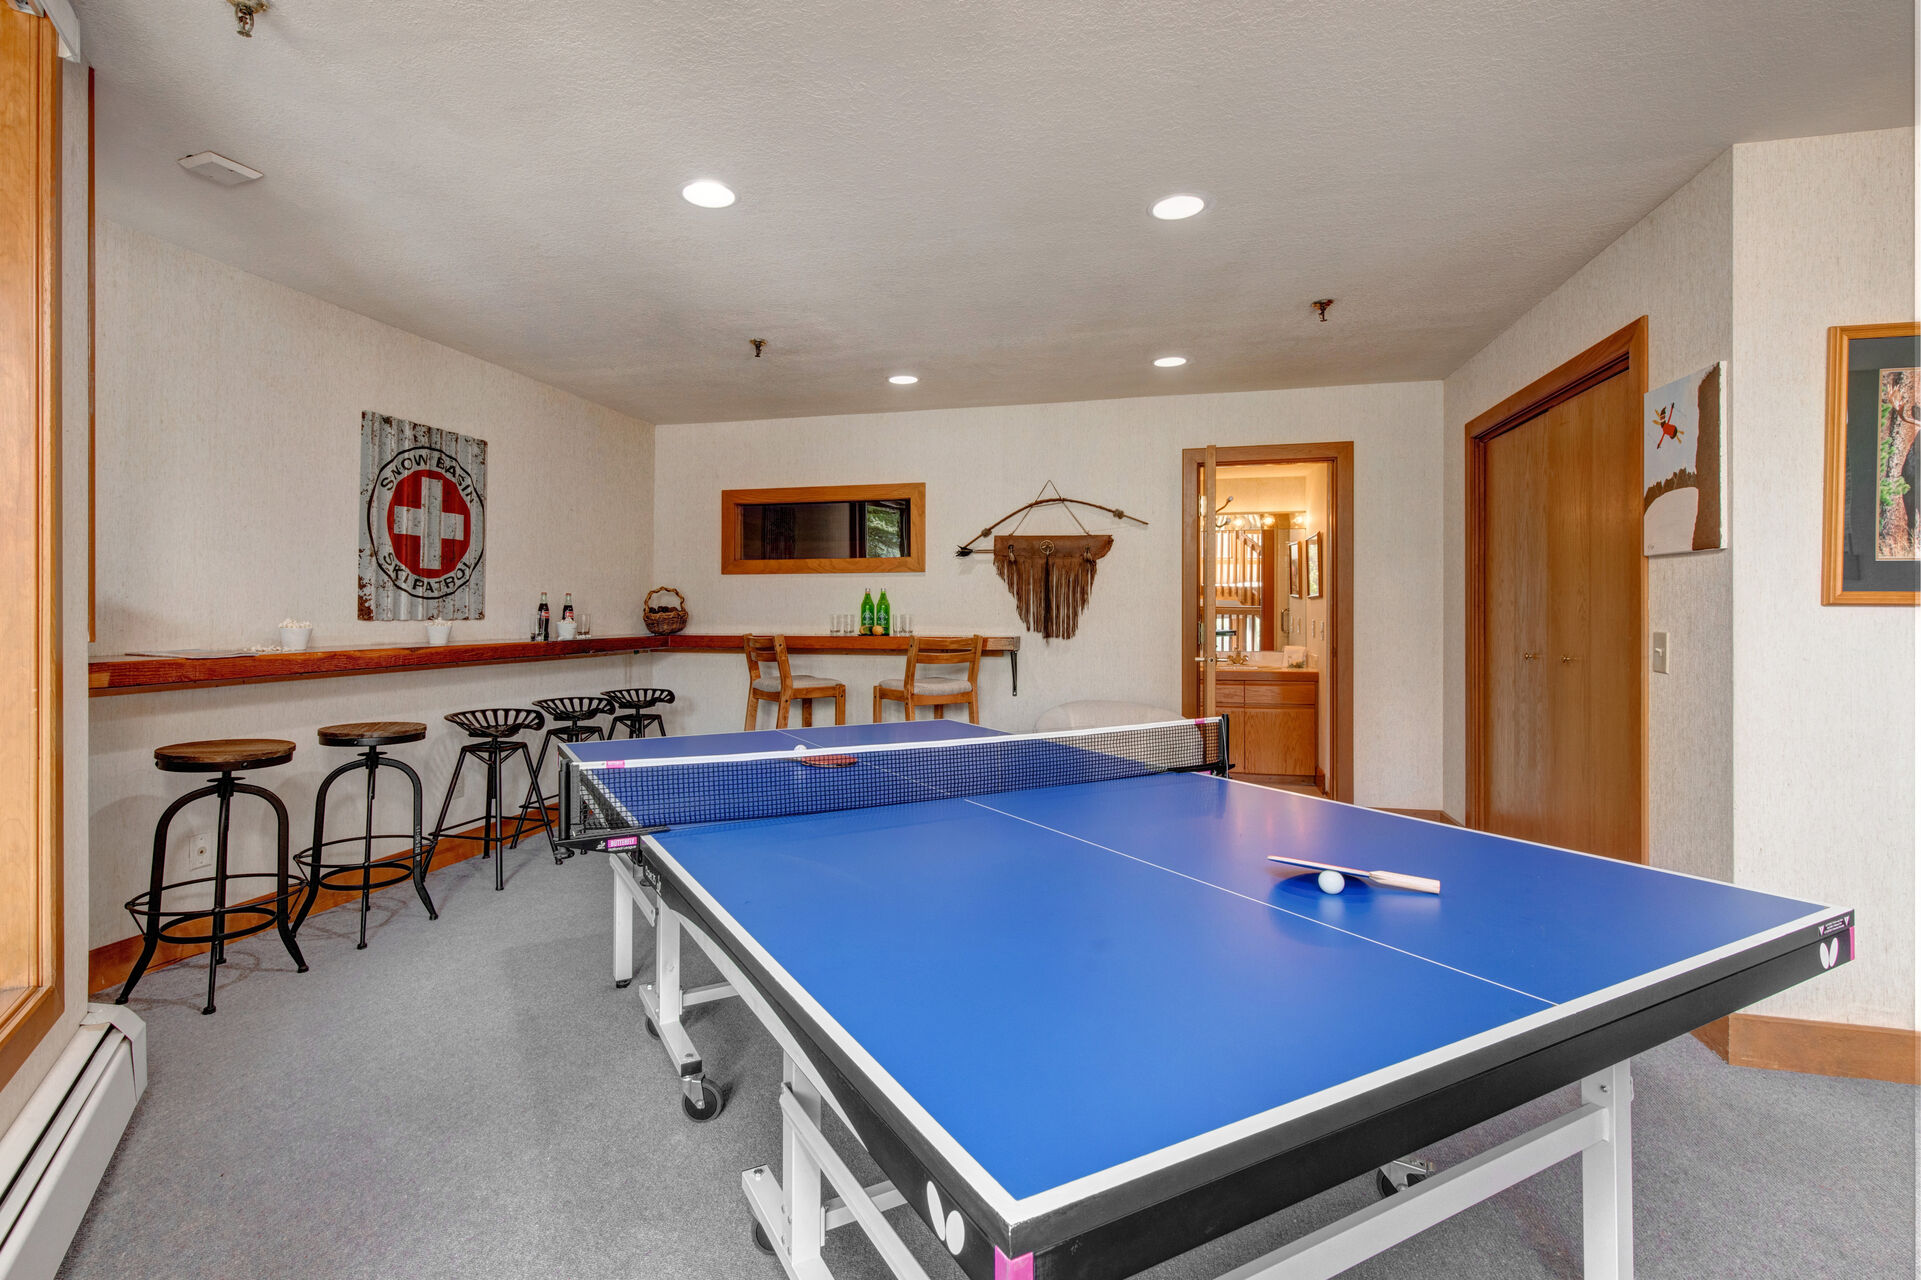 Ping Pong Table and seating area with access to lower level patio